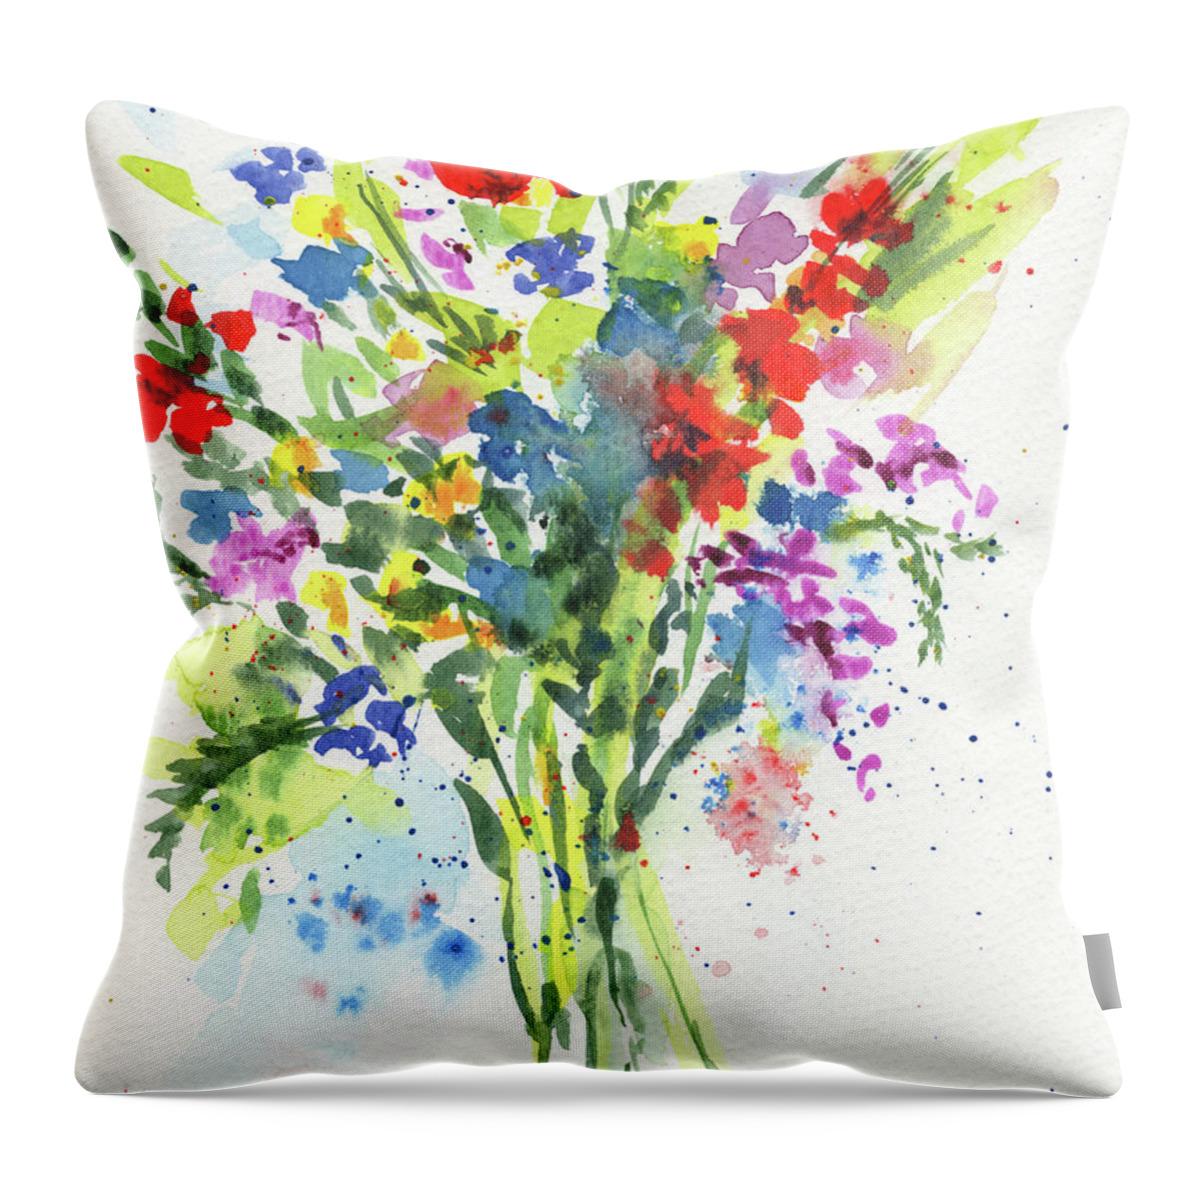 Abstract Flowers Throw Pillow featuring the painting Abstract Flowers Burst Of Multicolor Splash Of Watercolor I by Irina Sztukowski